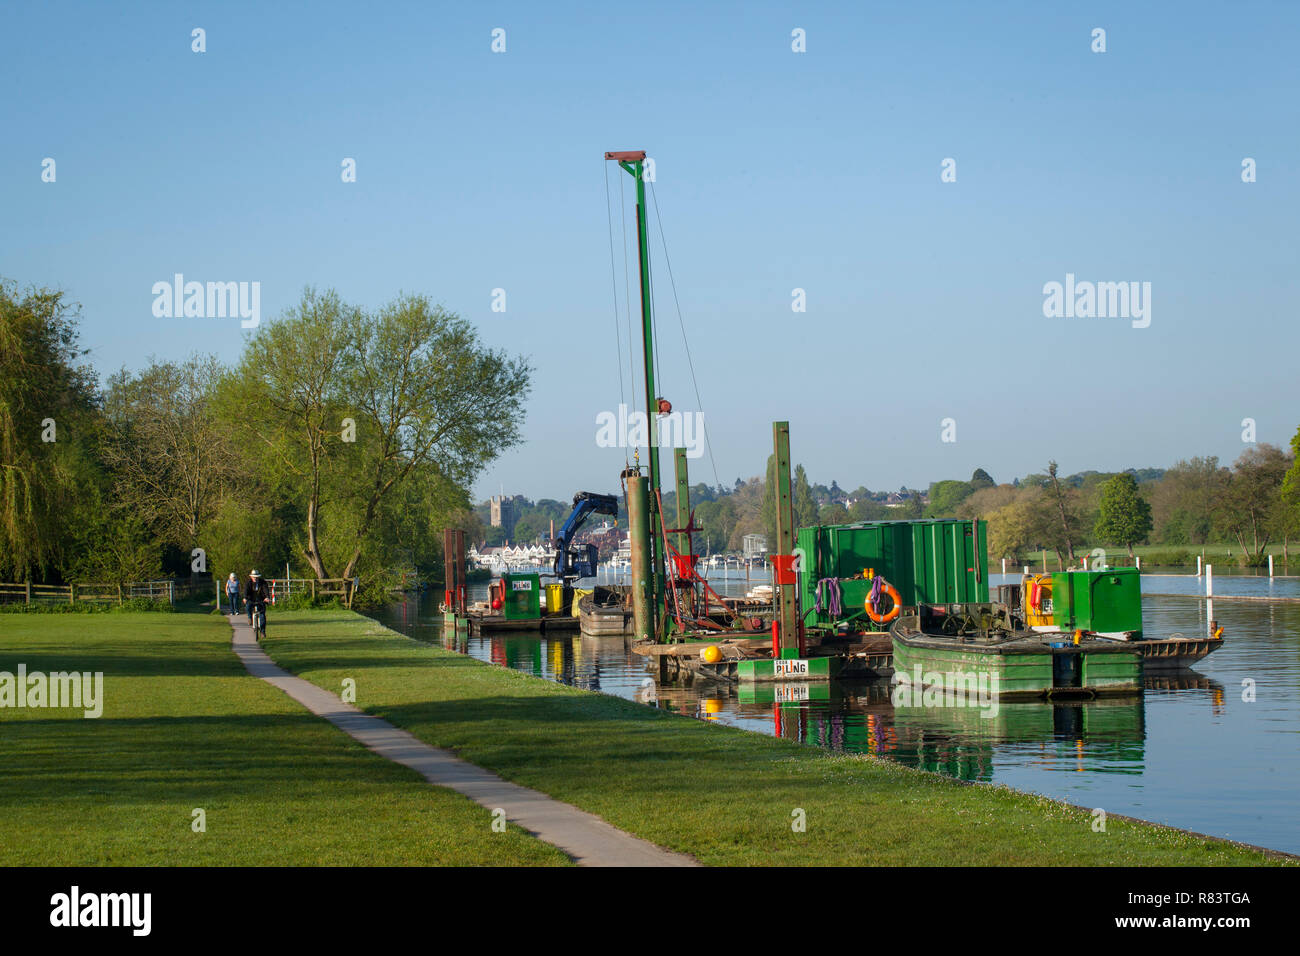 The pile-driving barge for positioning the booms and structures that mark out the course of Henley Royal Regatta Stock Photo